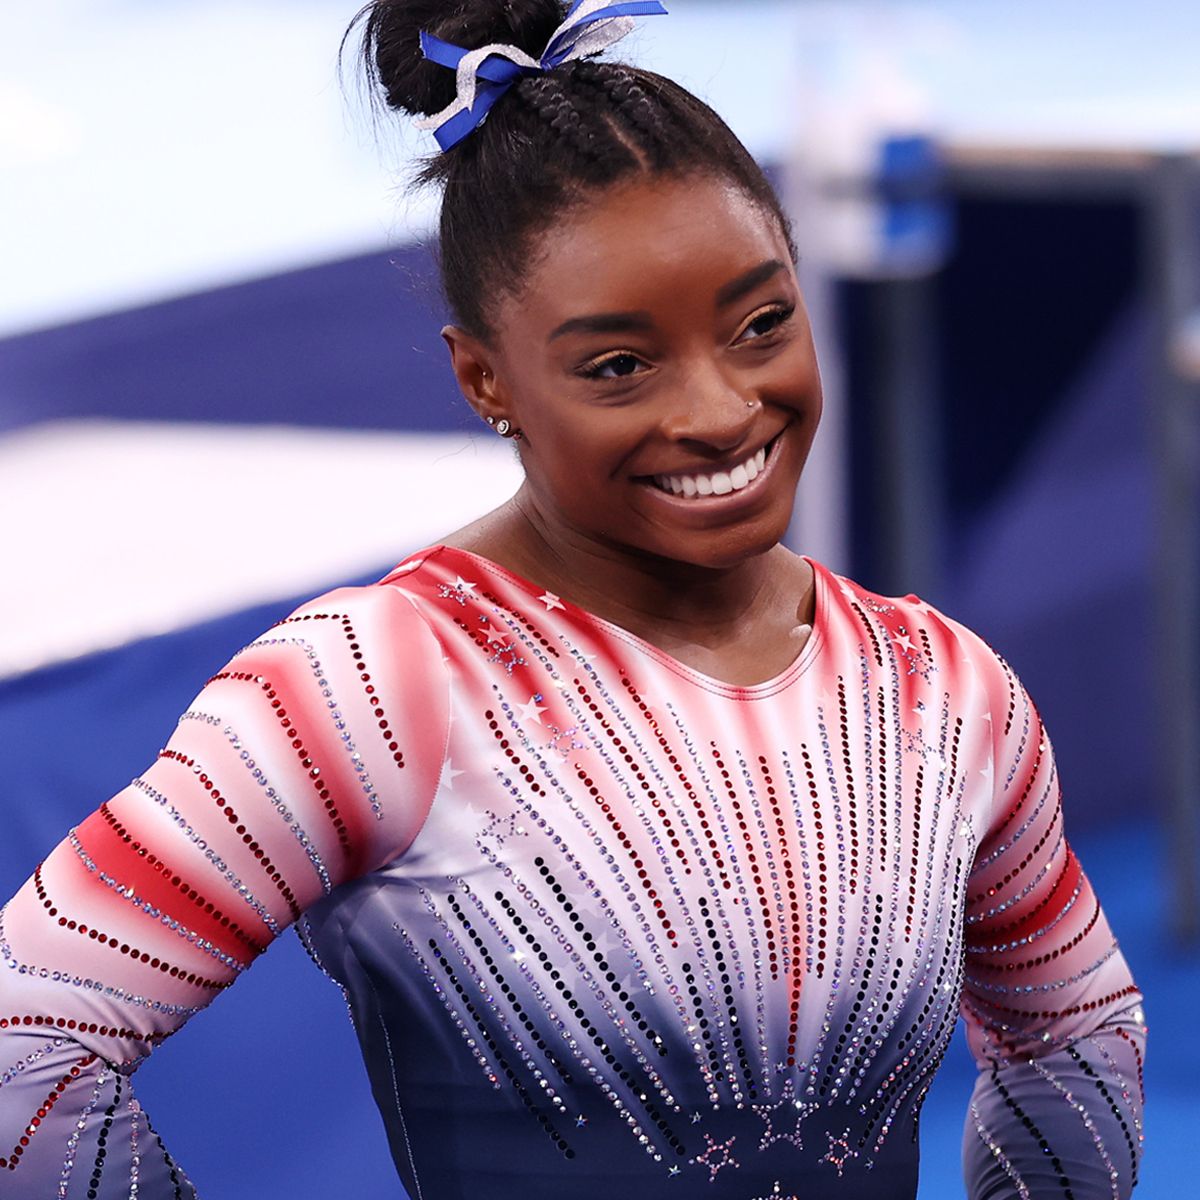 Simone Biles Shares Hope to Return for 2024 Olympics After “Twisties”